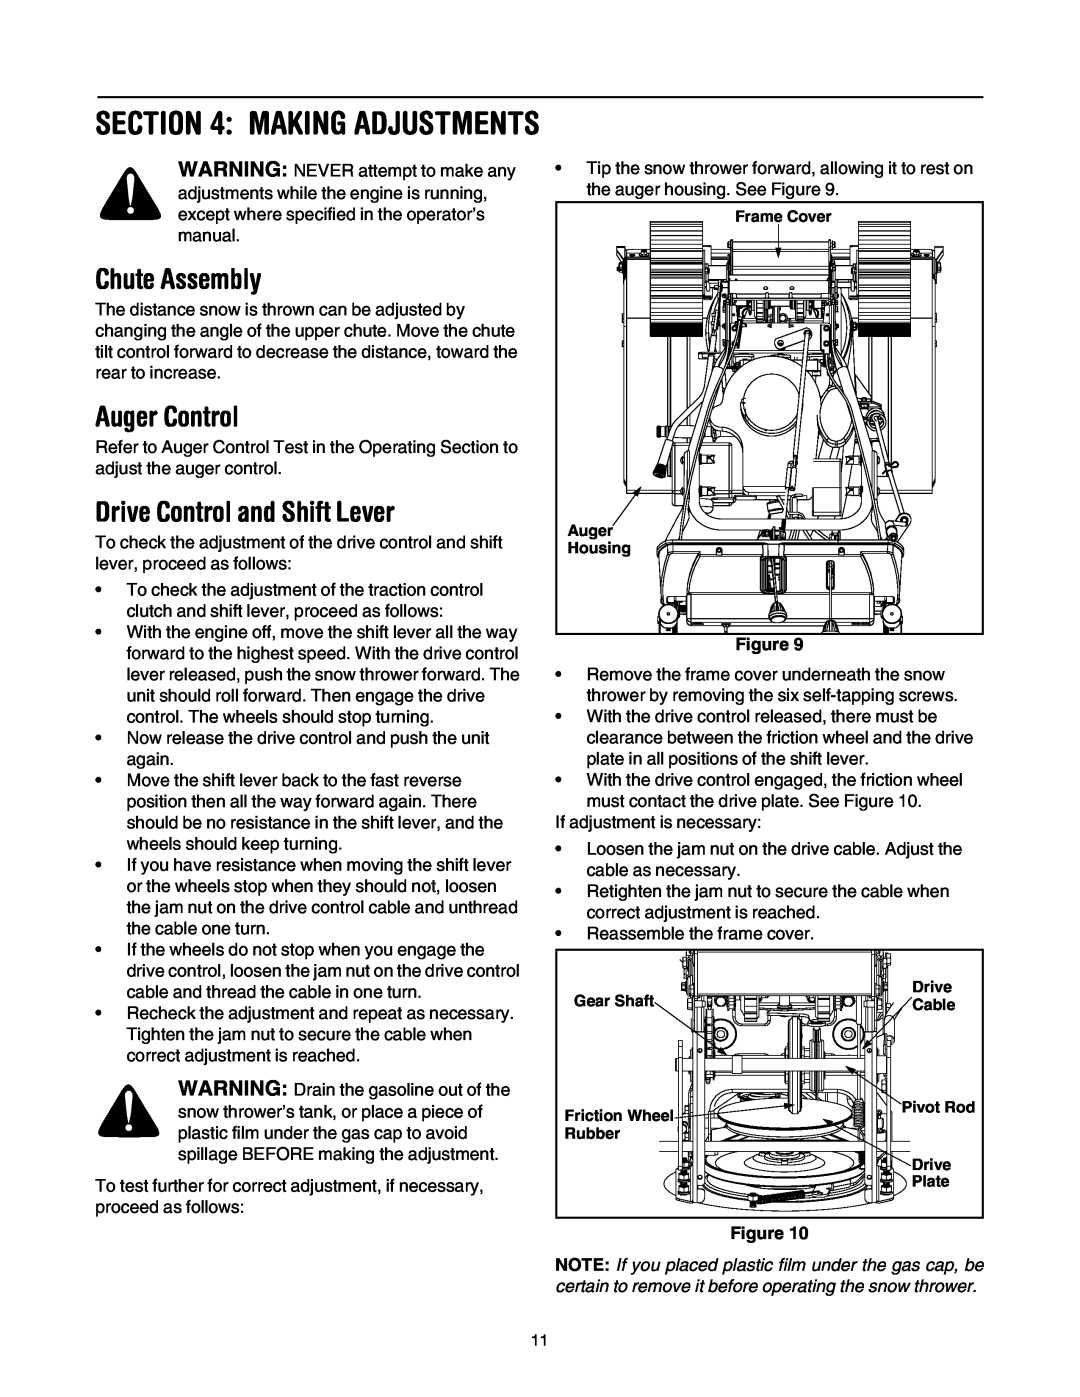 Cub Cadet 730 STE manual Chute Assembly, Auger Control, Drive Control and Shift Lever, Making Adjustments 